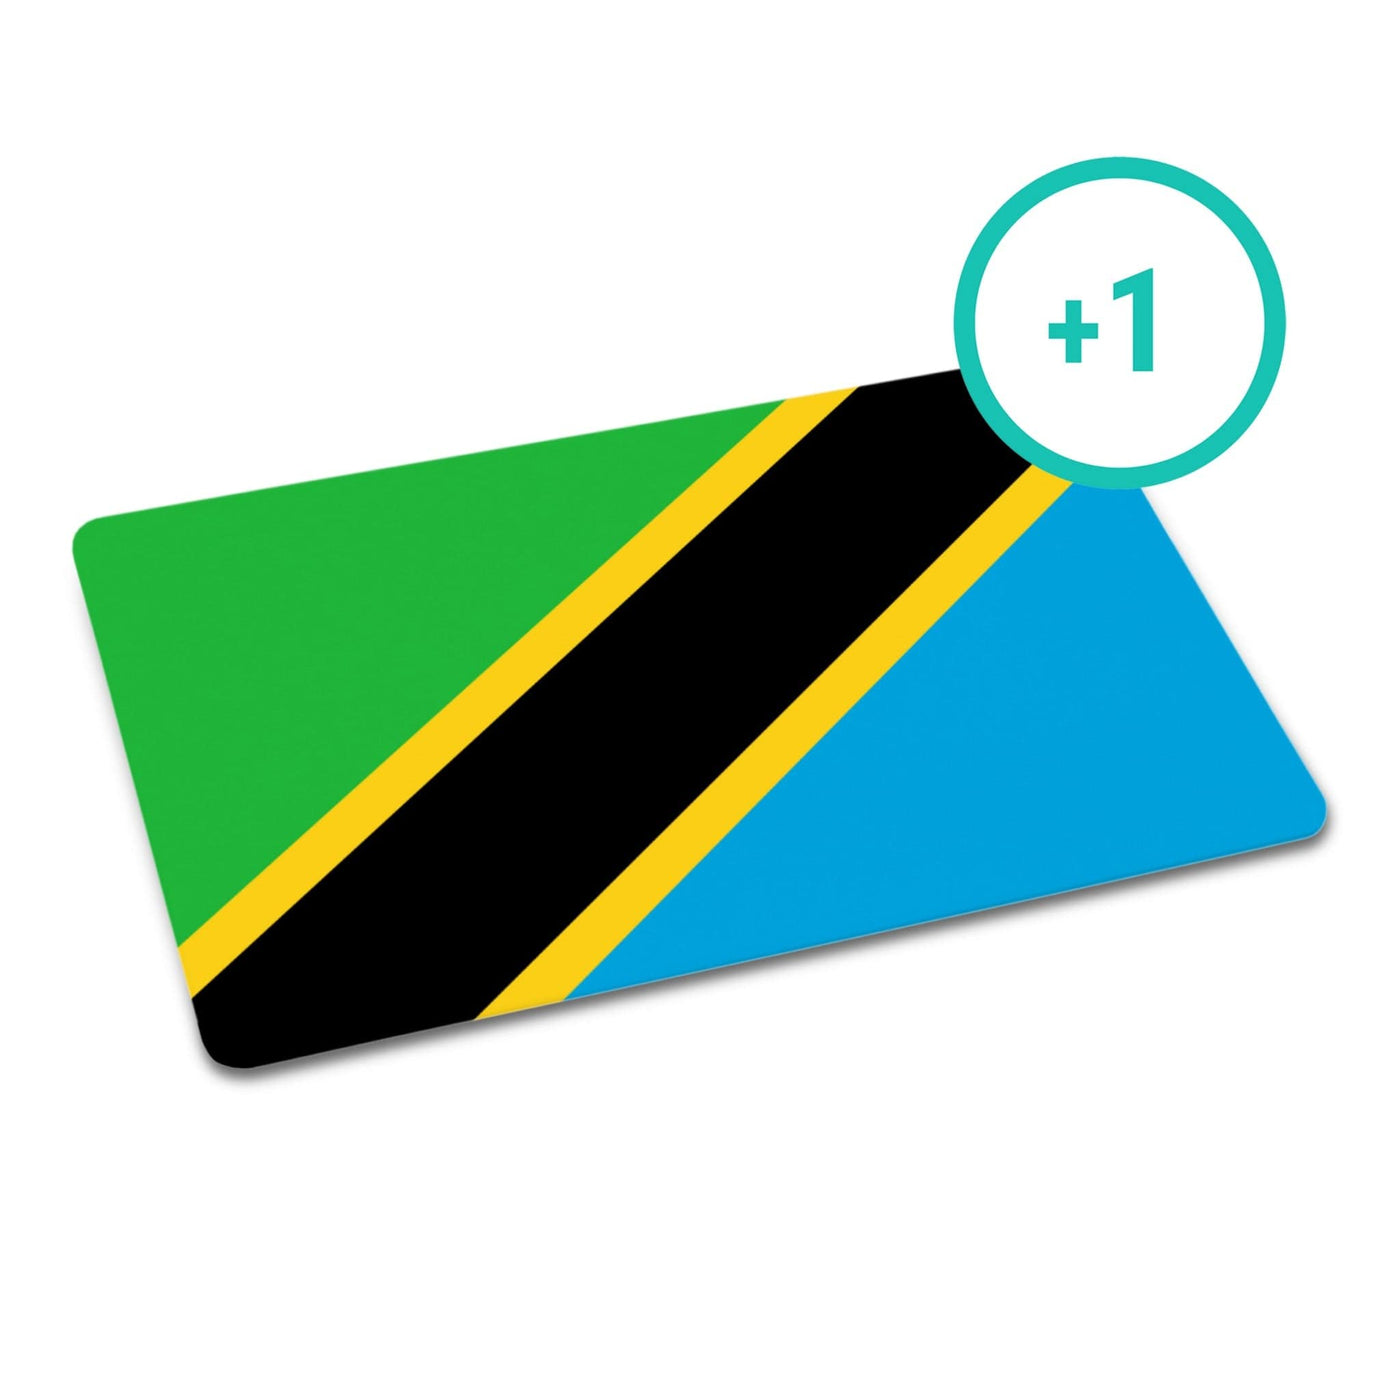 Additional Customized Card: Swahili (Leave in cart to purchase)